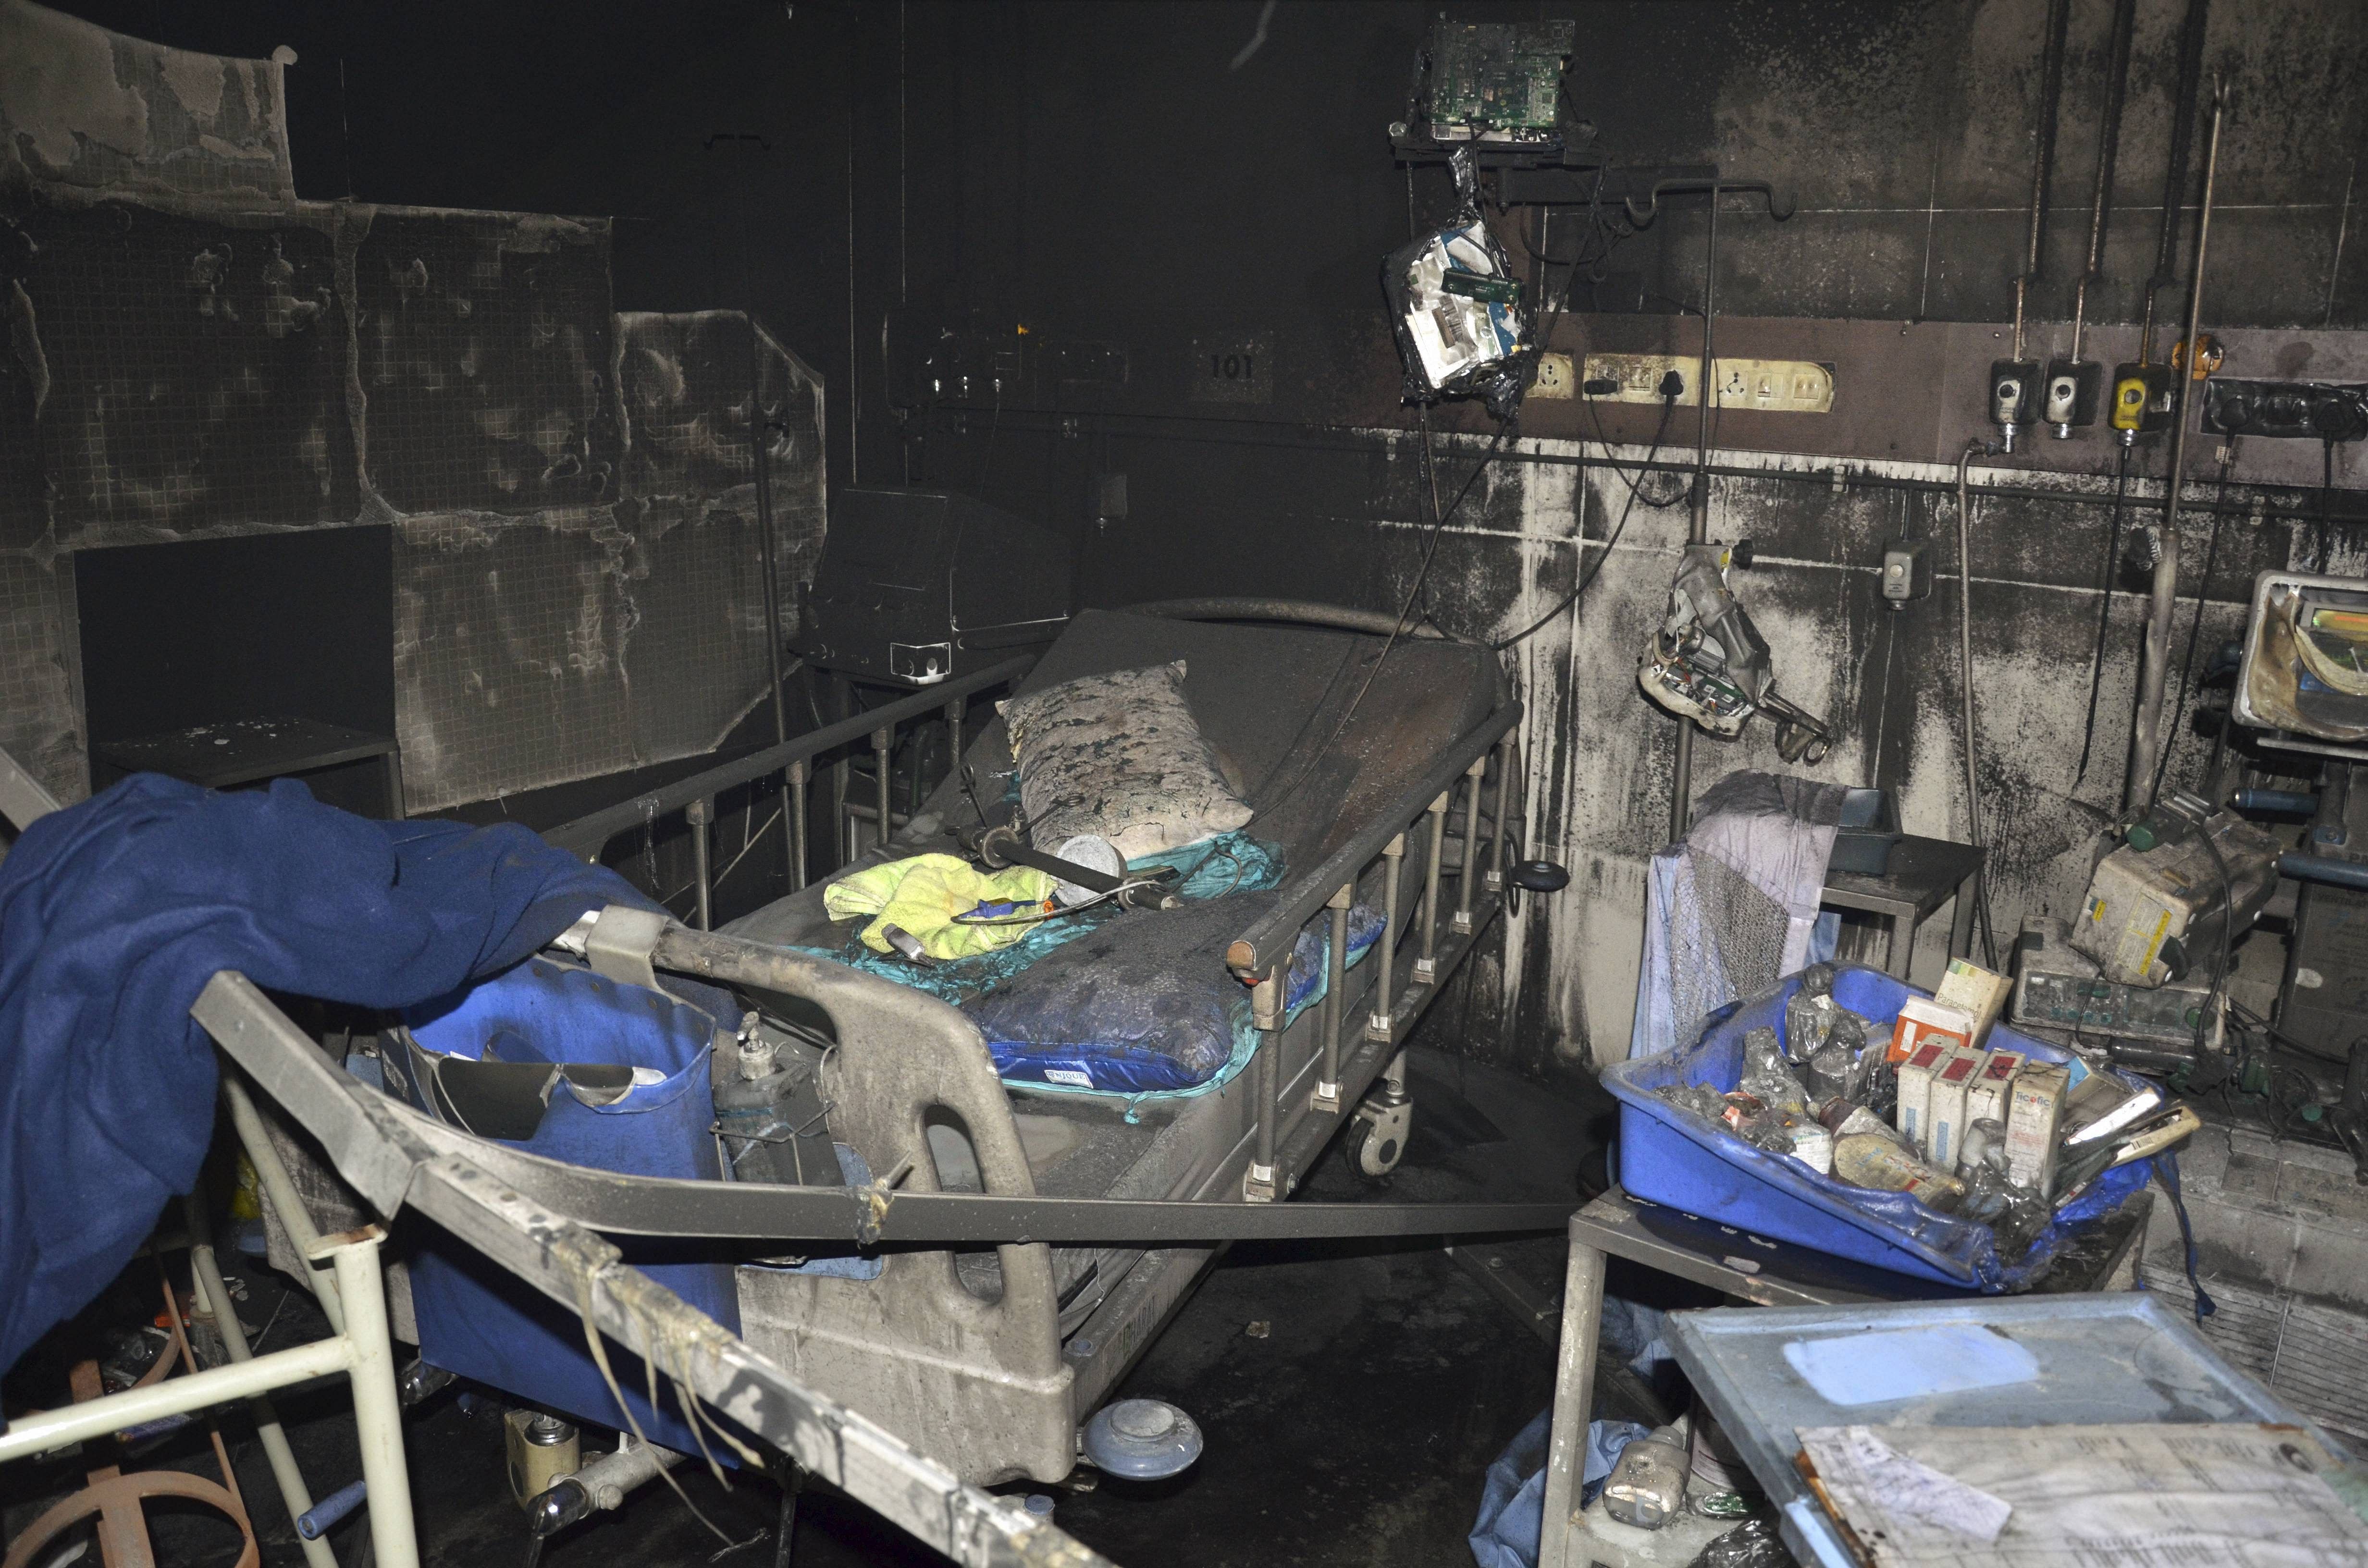 Charred remains inside the ICU of a designated COVID-19 hospital after the fire broke out today, in Rajkot, Friday, Nov. 27, 2020. Five Covid-19 patients died in the incident. Credit: PTI Photo